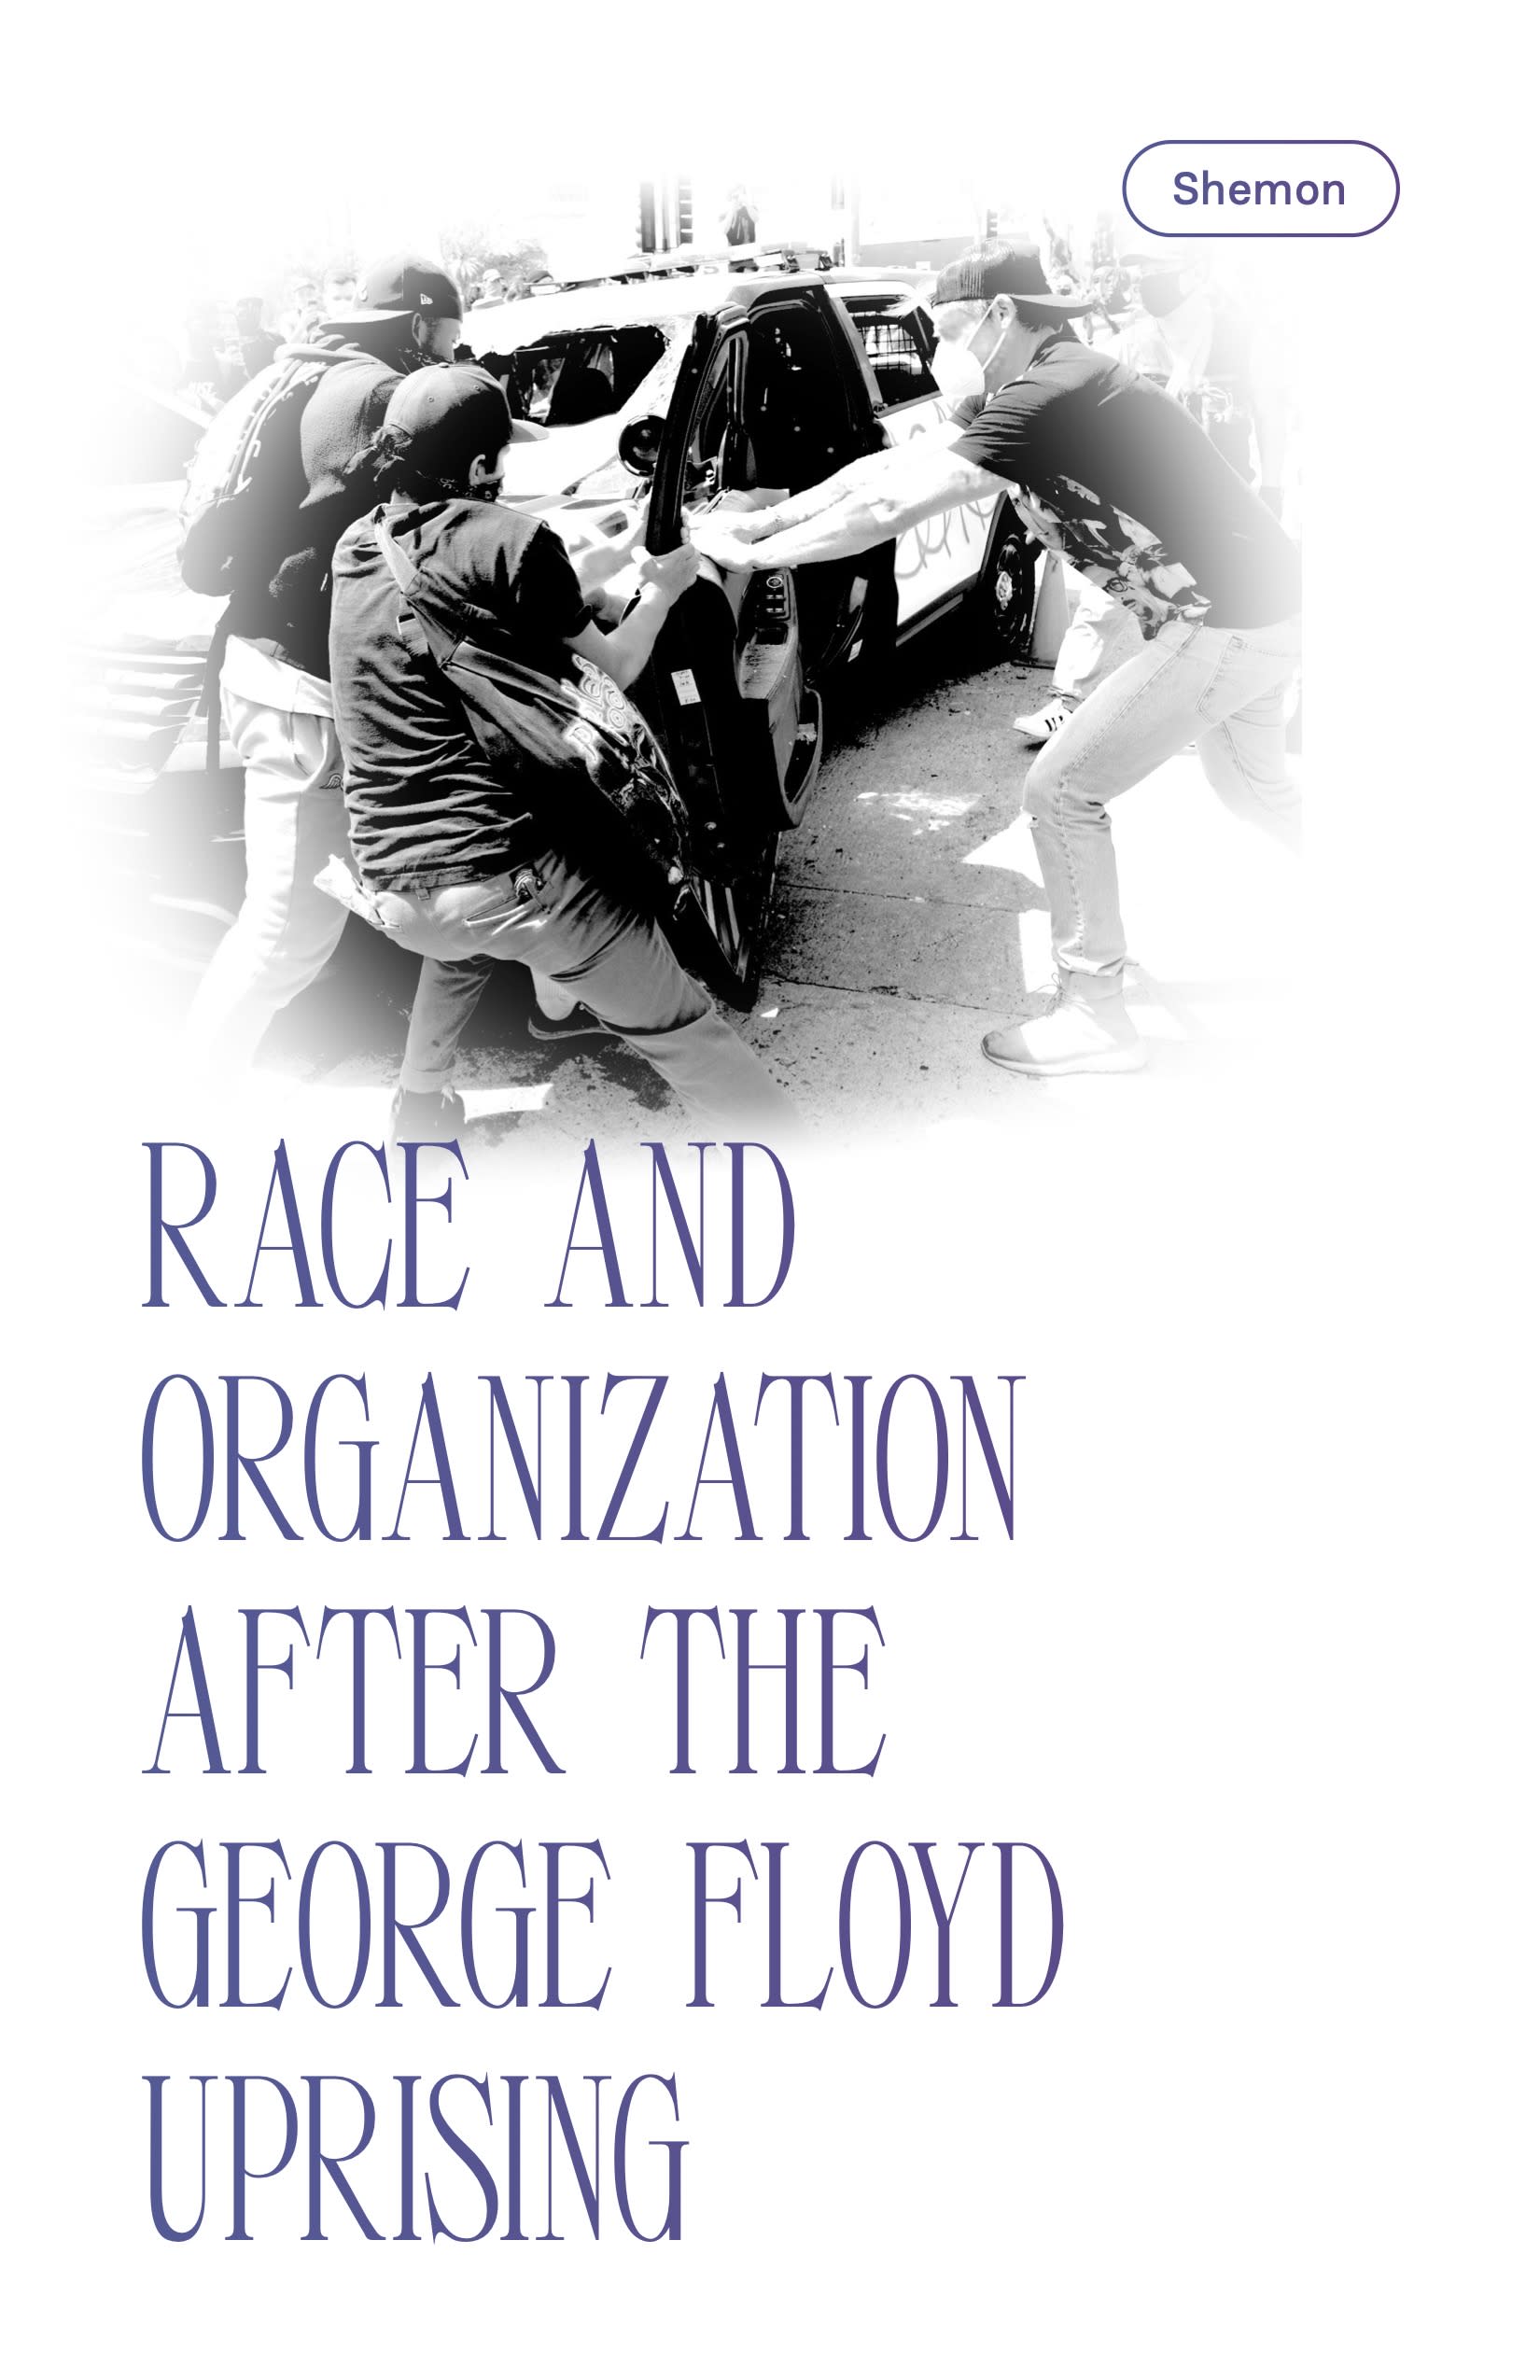 Cover Image for Race and Organization after the George Floyd Uprising